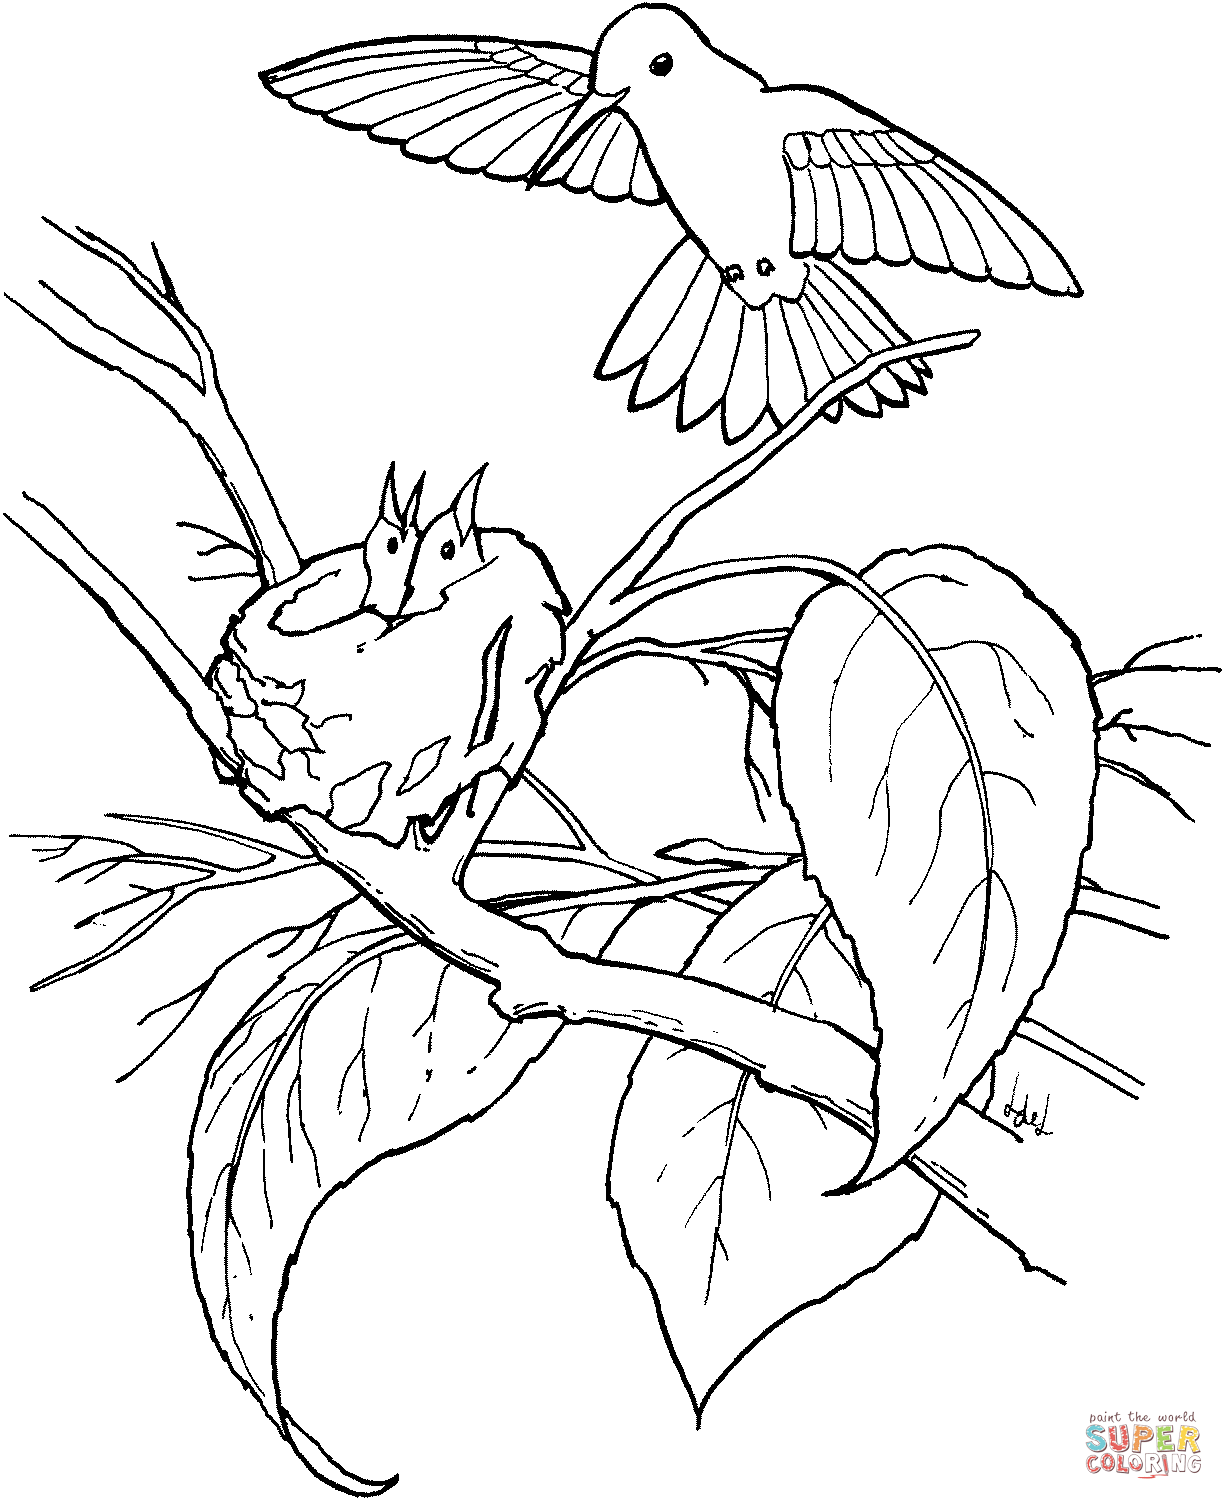 Hummingbirds coloring pages | Free Coloring Pages